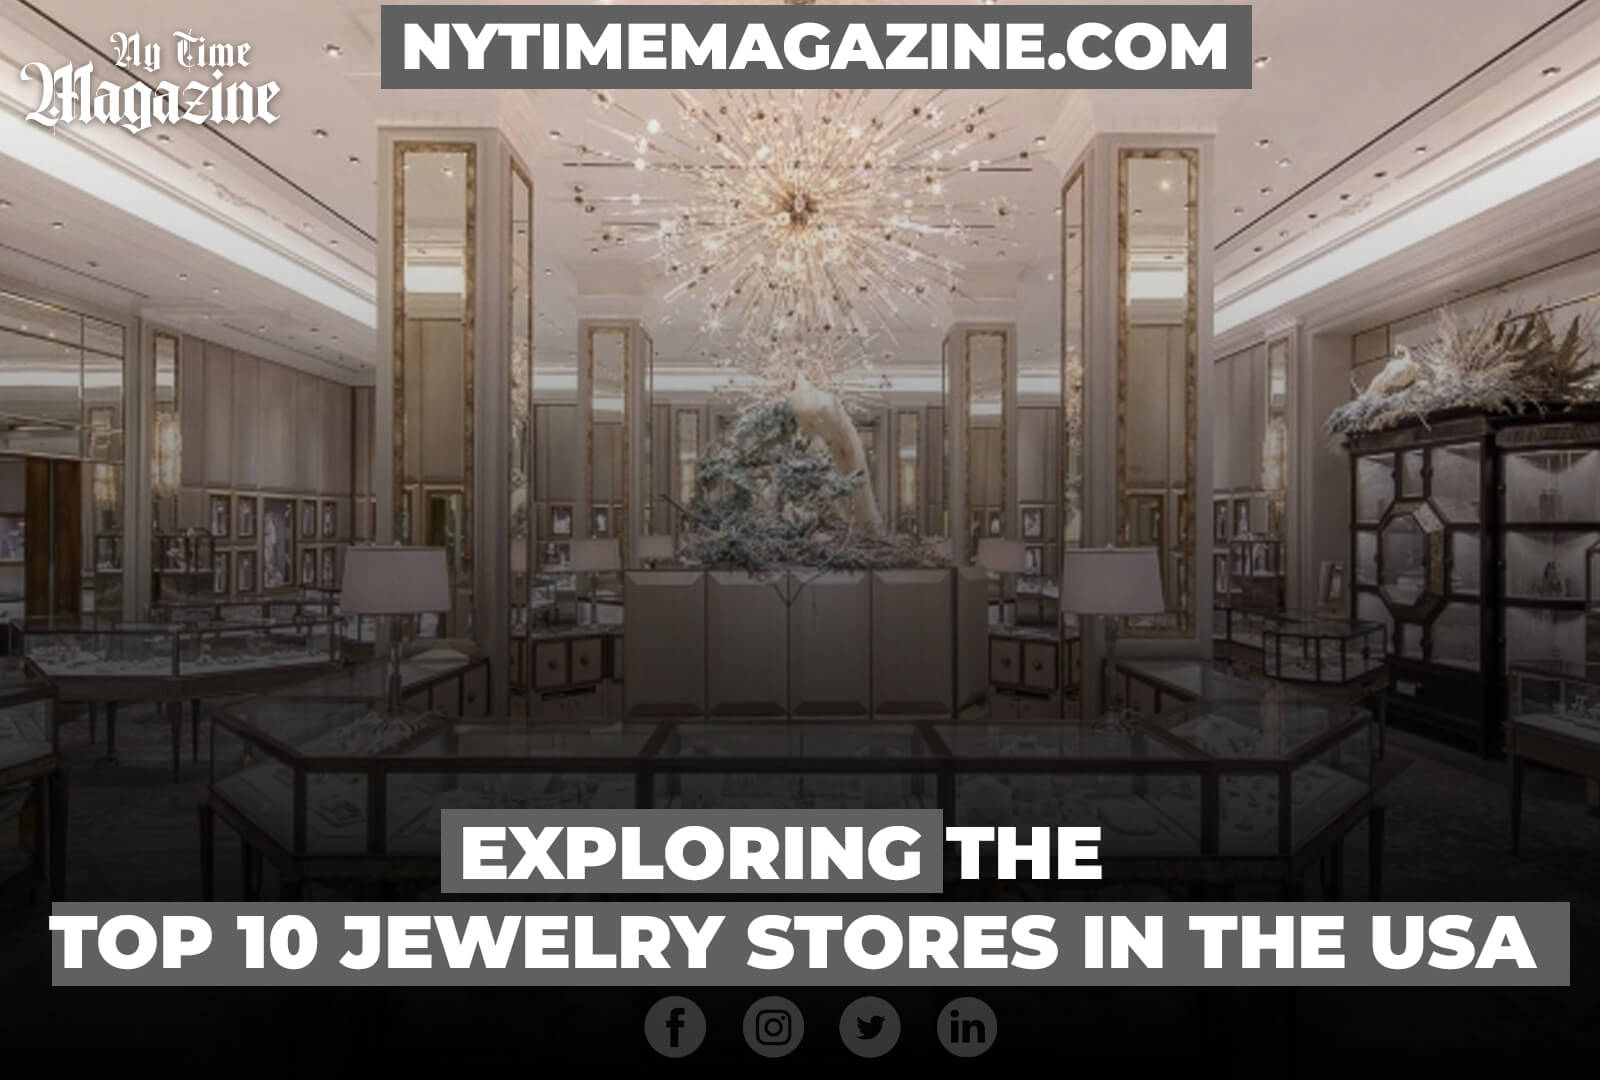 TOP 10 JEWELRY STORES IN THE USA